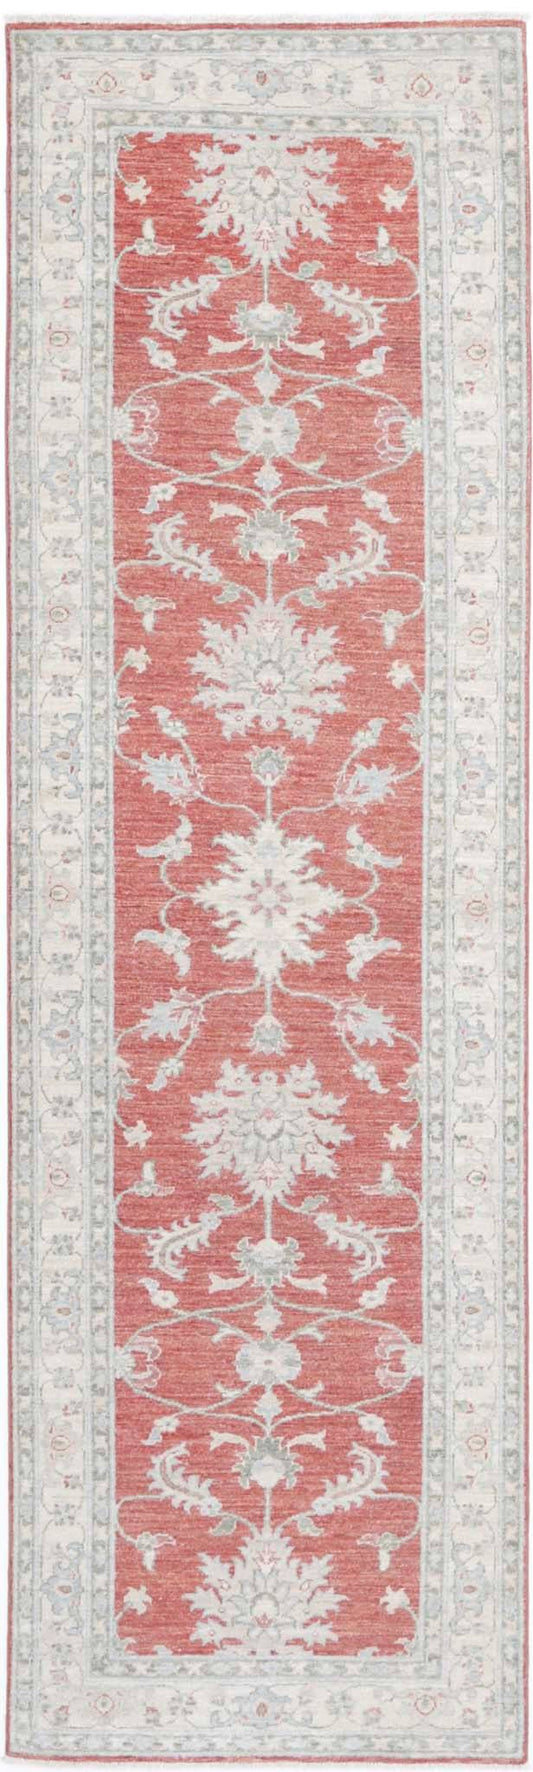 Traditional Hand Knotted Ziegler Farhan Wool Rug of Size 2'8'' X 9'7'' in Red and Ivory Colors - Made in Afghanistan